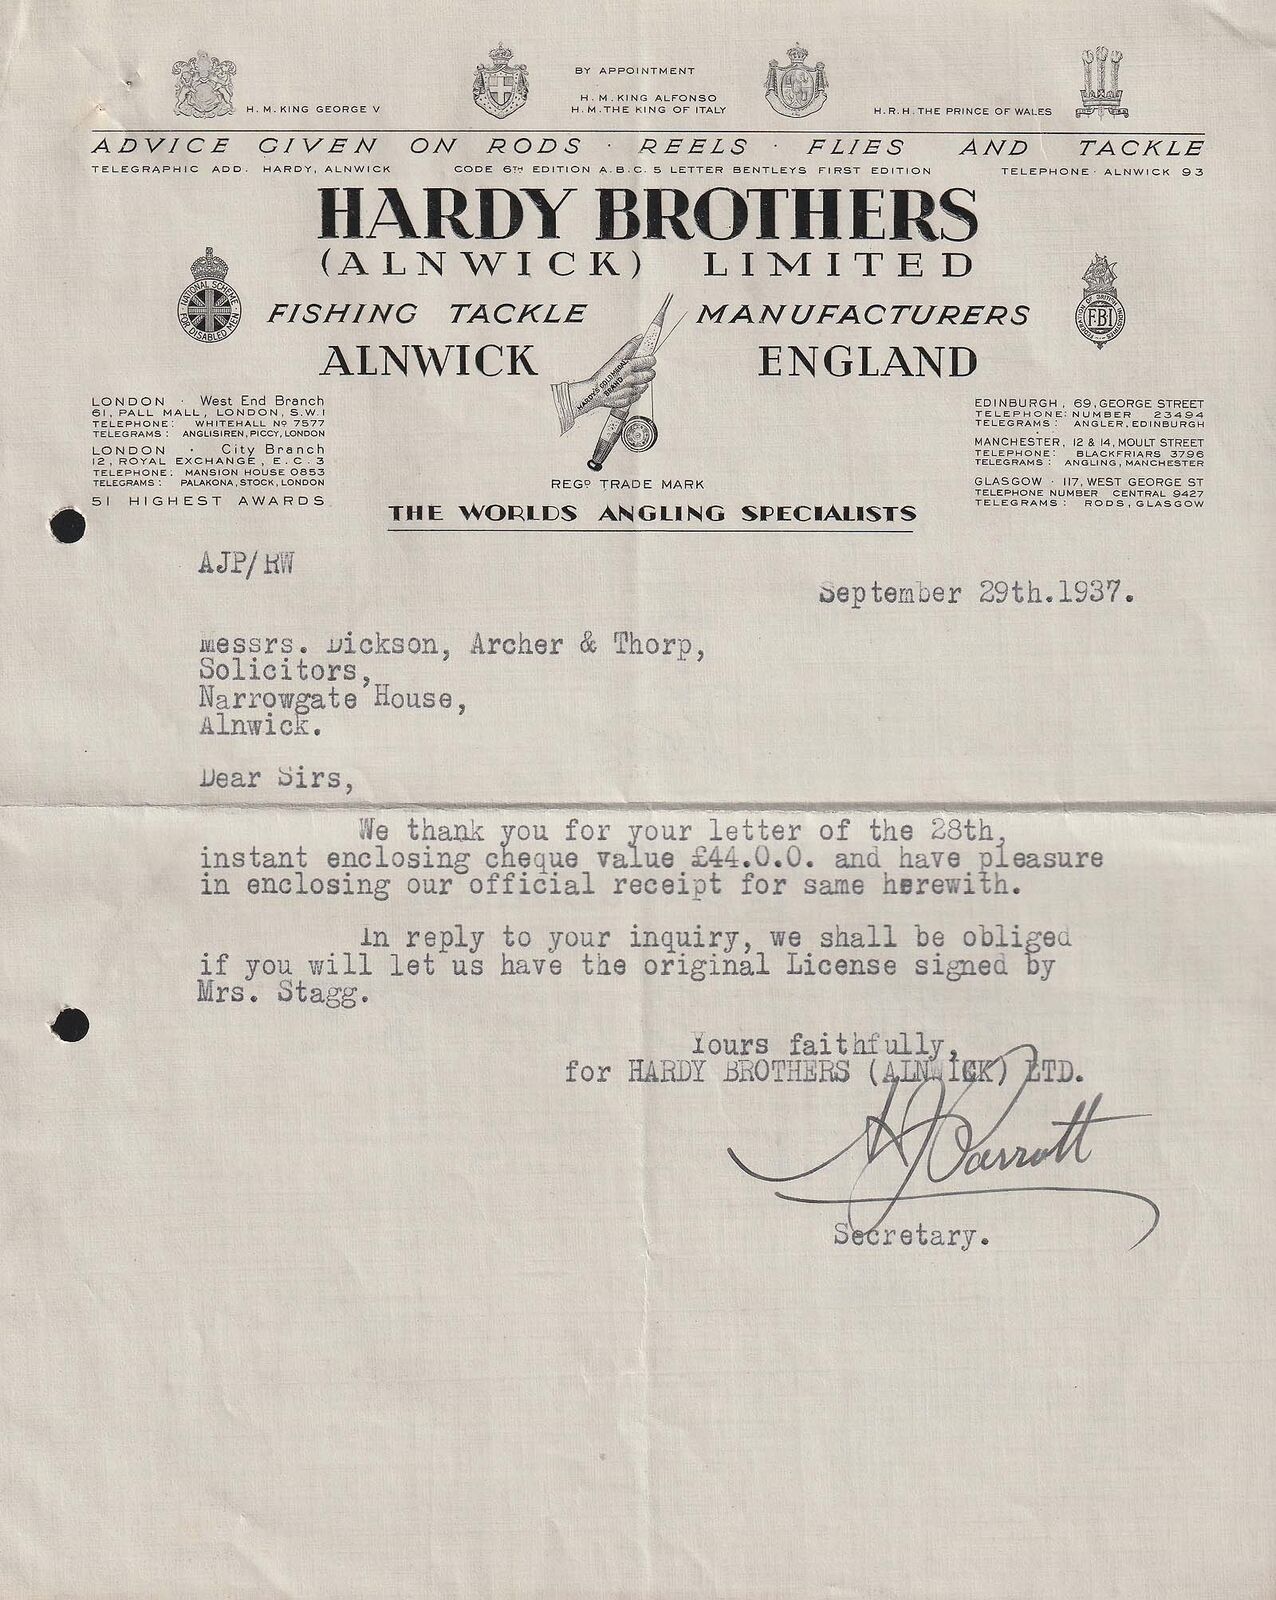 1937 HARDY BROTHERS, Alnwick, Fishing Tackle Manufacturers, to GV & HRH P of W.